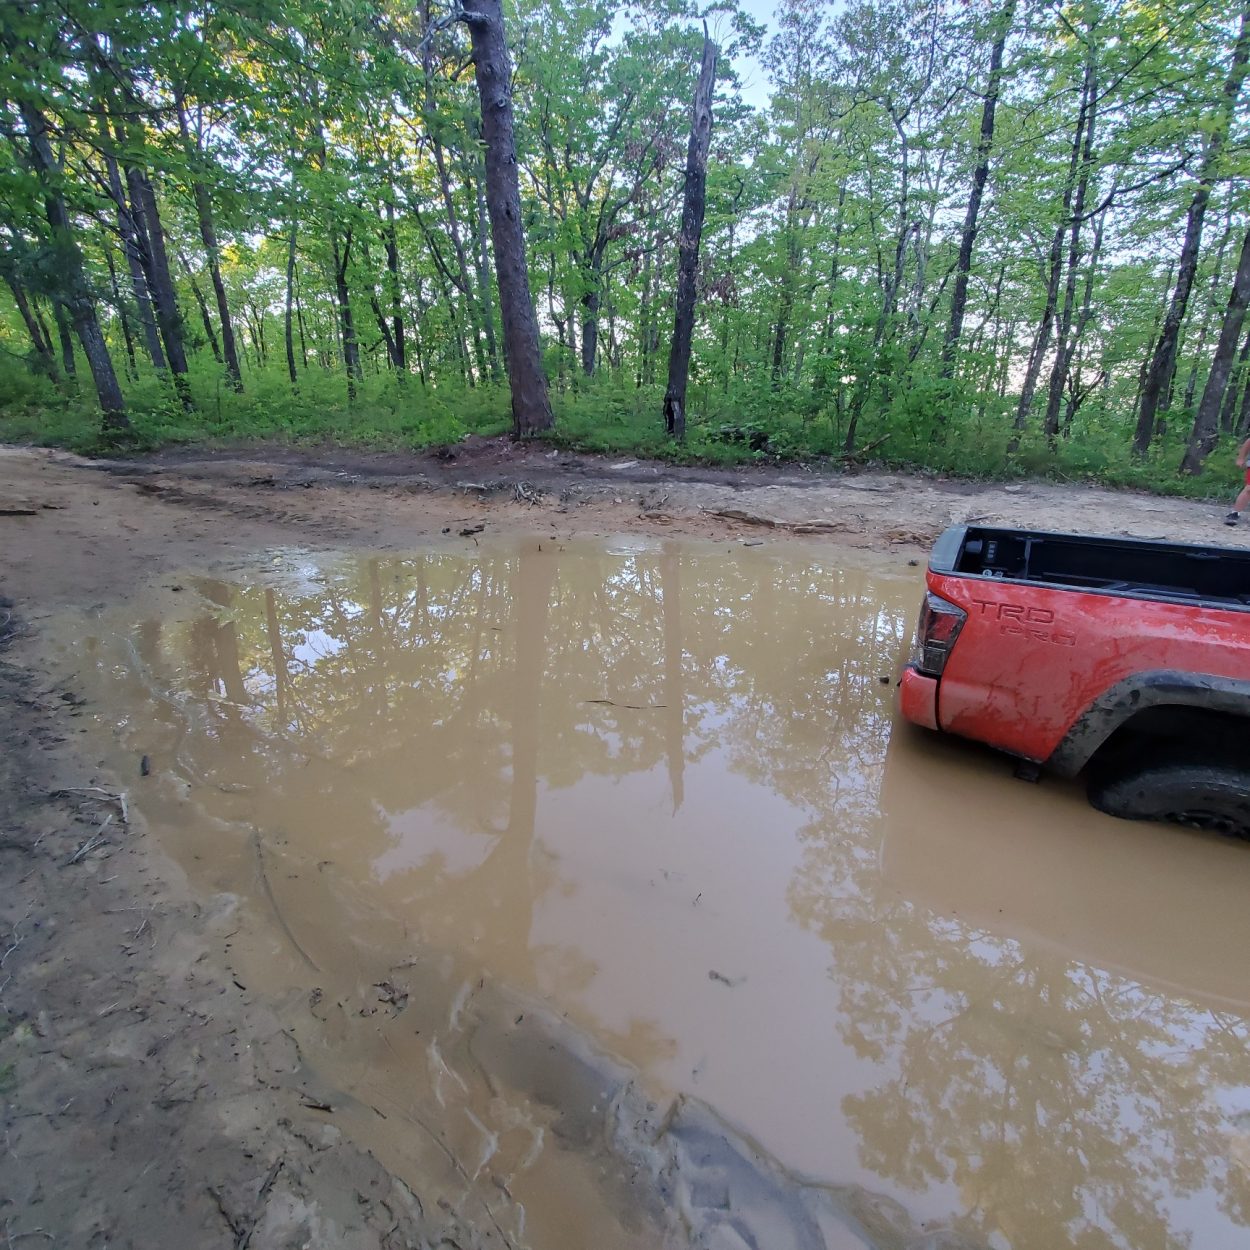 offroad recovery in Alabama distance to solid ground